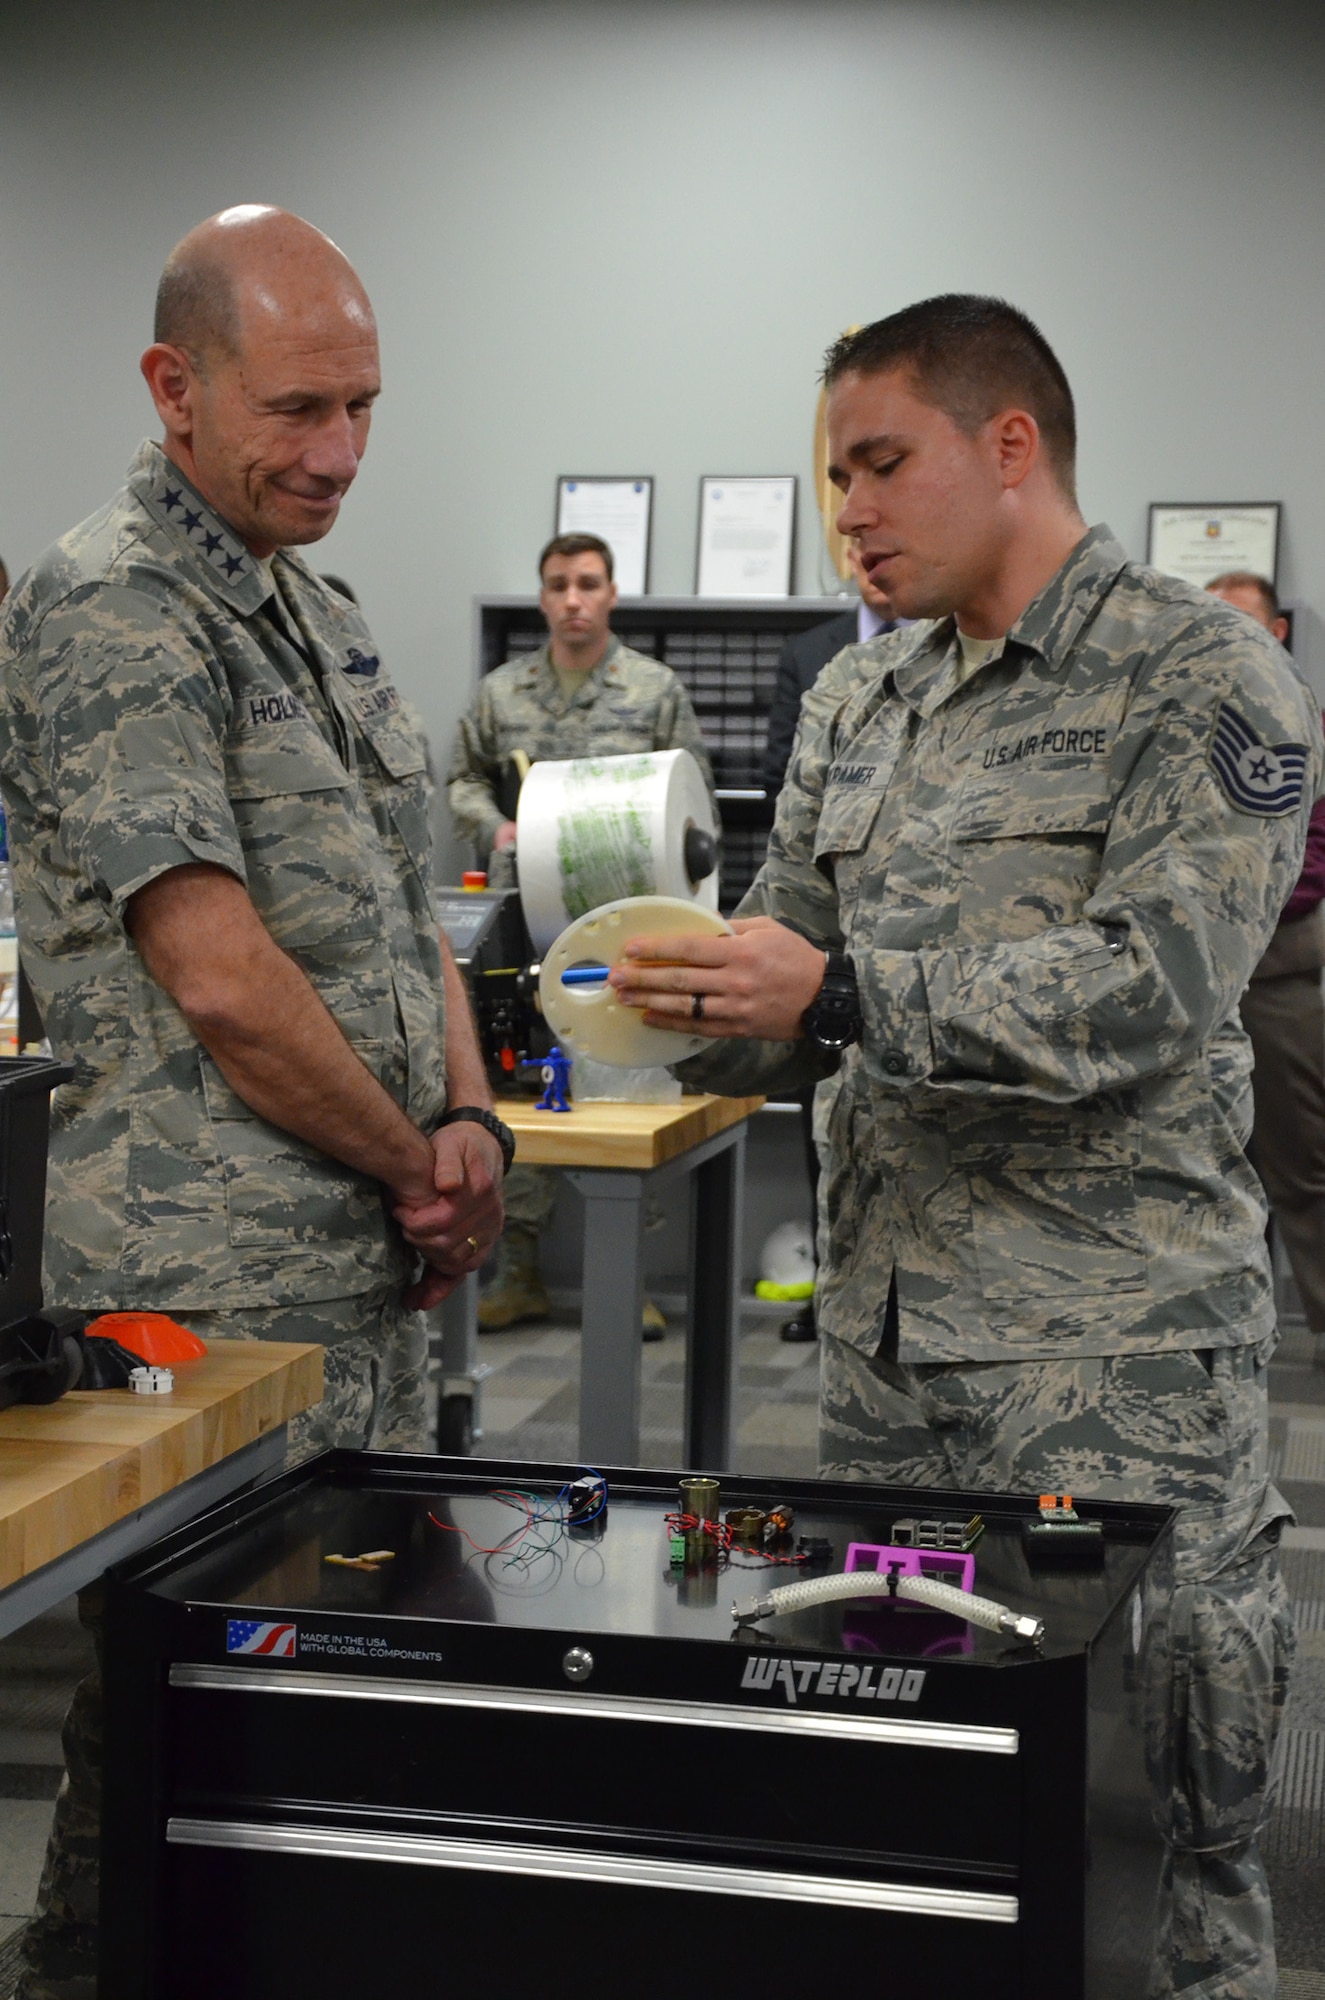 Tech. Sgt. Donald E. Kramer II, noncommissioned officer in charge of Innovation Operations for the Air Force Technical Applications Center, shows Gen. Mike Holmes, commander of Air Combat Command, a prototype of an early iteration of a materials program carousel created by AFTAC's Innovation Lab.  This was Holmes' first visit to the Department of Defense's sole nuclear treaty monitoring center at Patrick AFB, Fla.  (U.S. Air Force photo by Susan A. Romano)